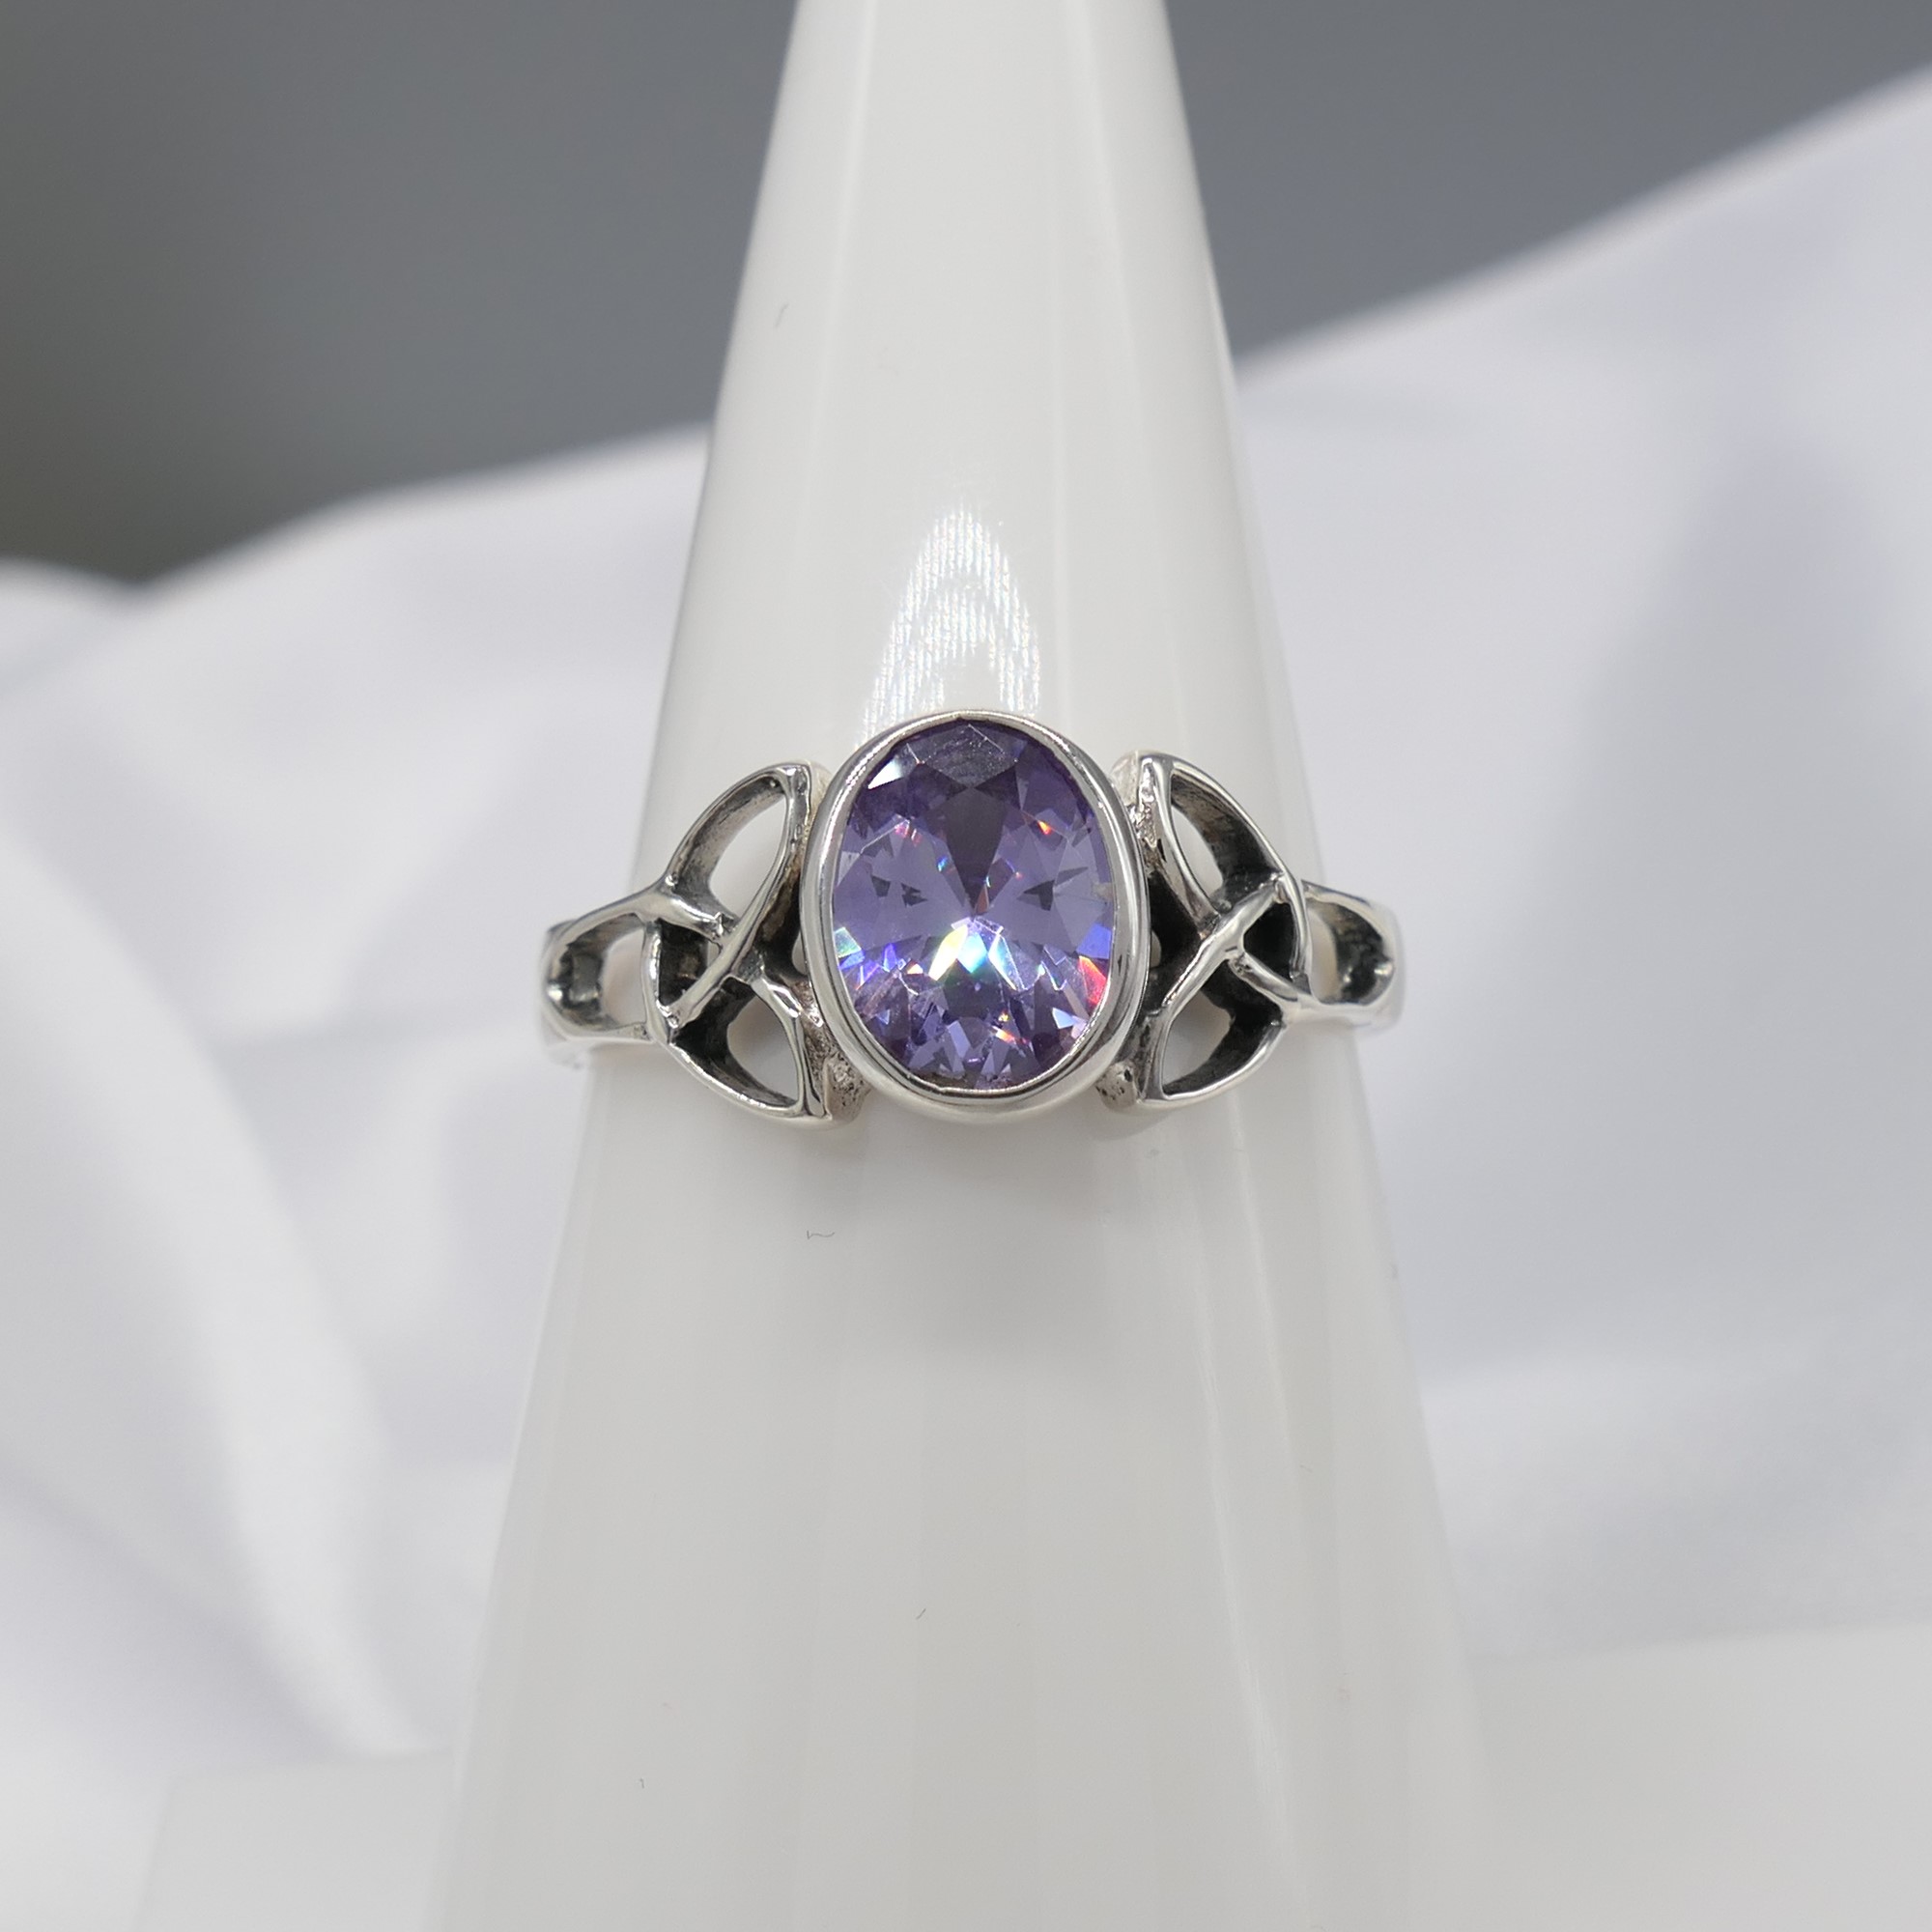 Sterling silver Celtic-style dress ring set with an oval purple cubic zirconia - Image 5 of 6